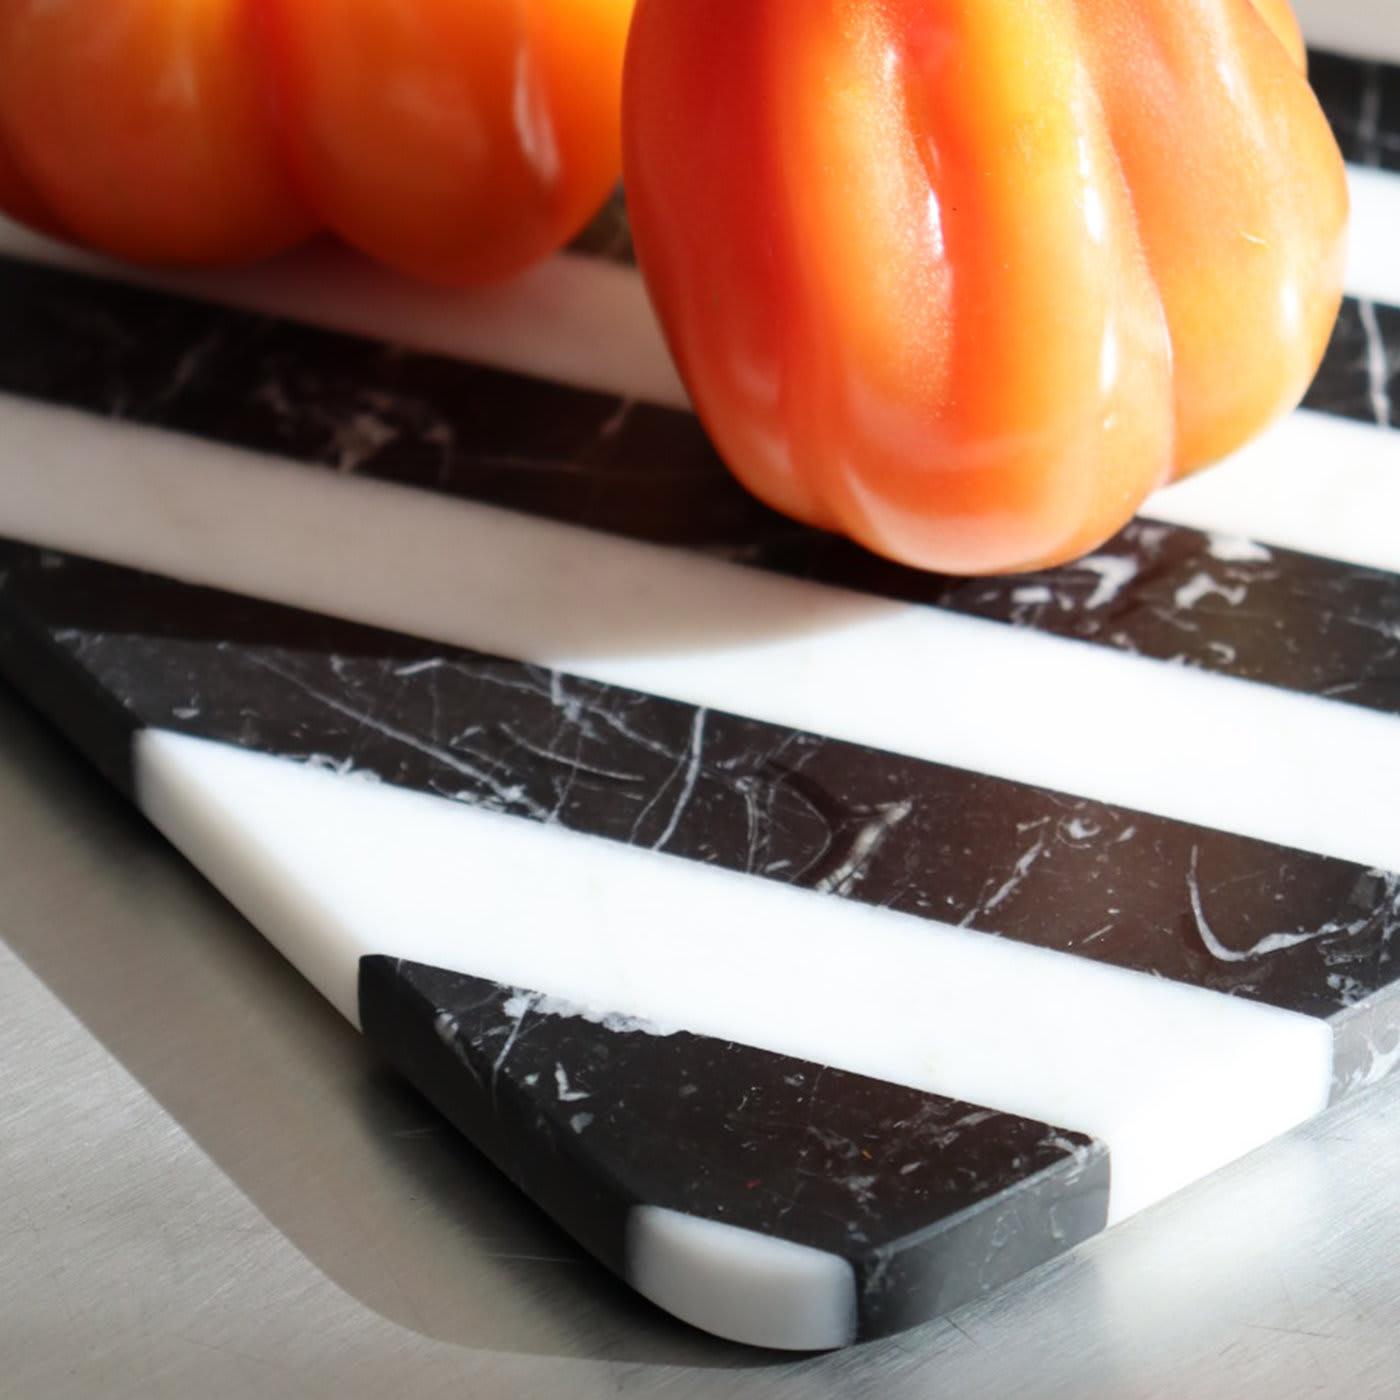 Bold in its versatility, this exceptional chopping board exudes sculptural appeal and modern elegance. The rectangular silhouette is handcrafted of white Arabescato and black Marquina marbles, the striped pattern reminiscent of the dramatic